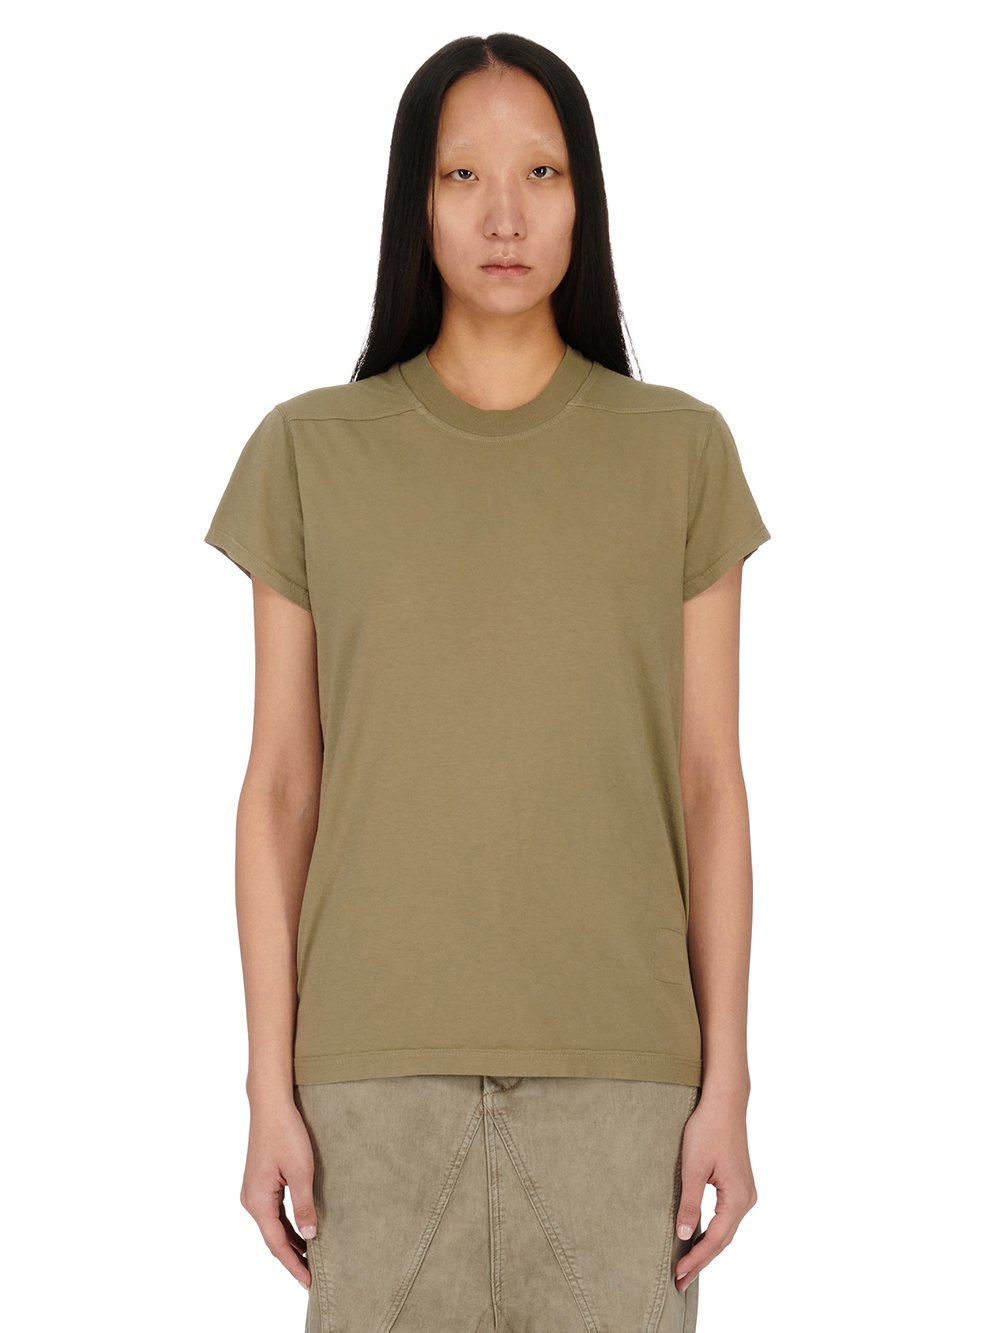 RICK OWENS FW23 LUXOR SMALL LEVEL T IN PALE GREEN MEDIUM WEIGHT COTTON JERSEY 